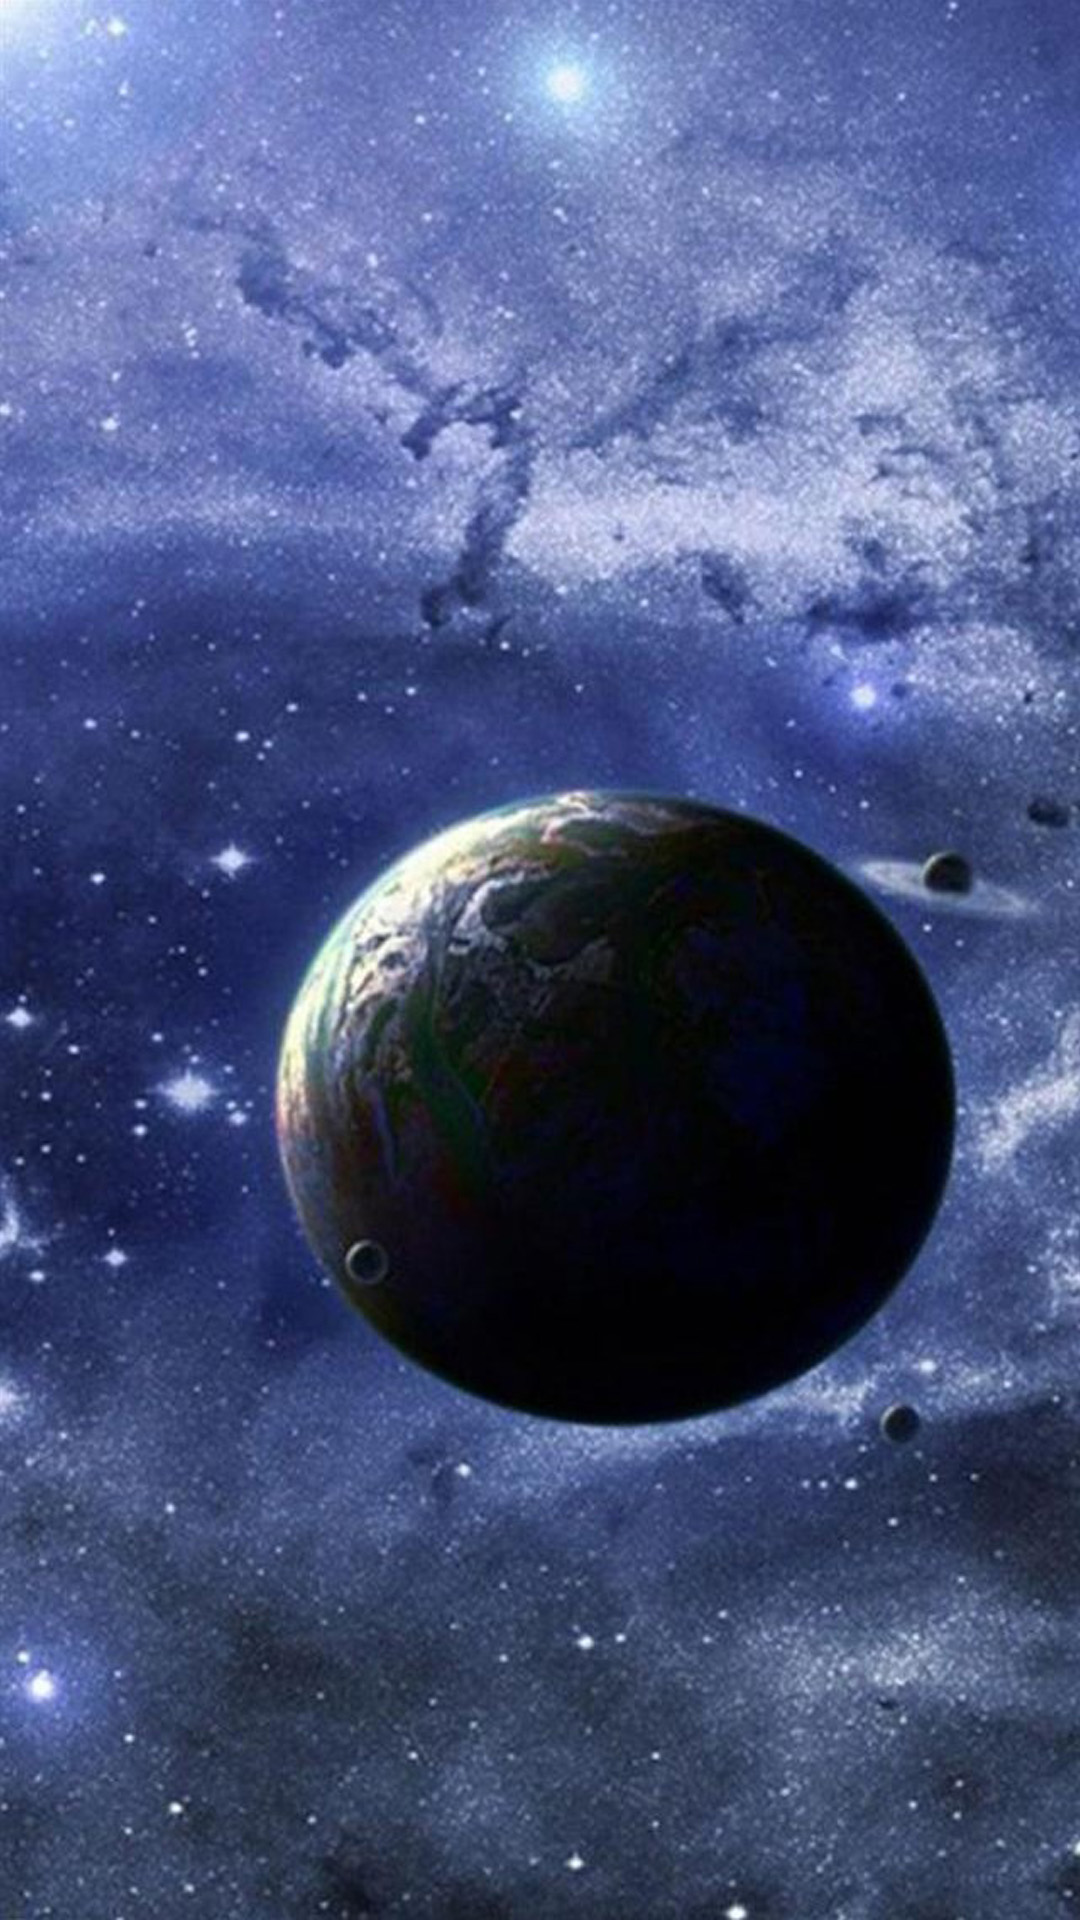 Magical Space Planet Android Wallpaper HD Wallpaper For Samsung Galaxy S6